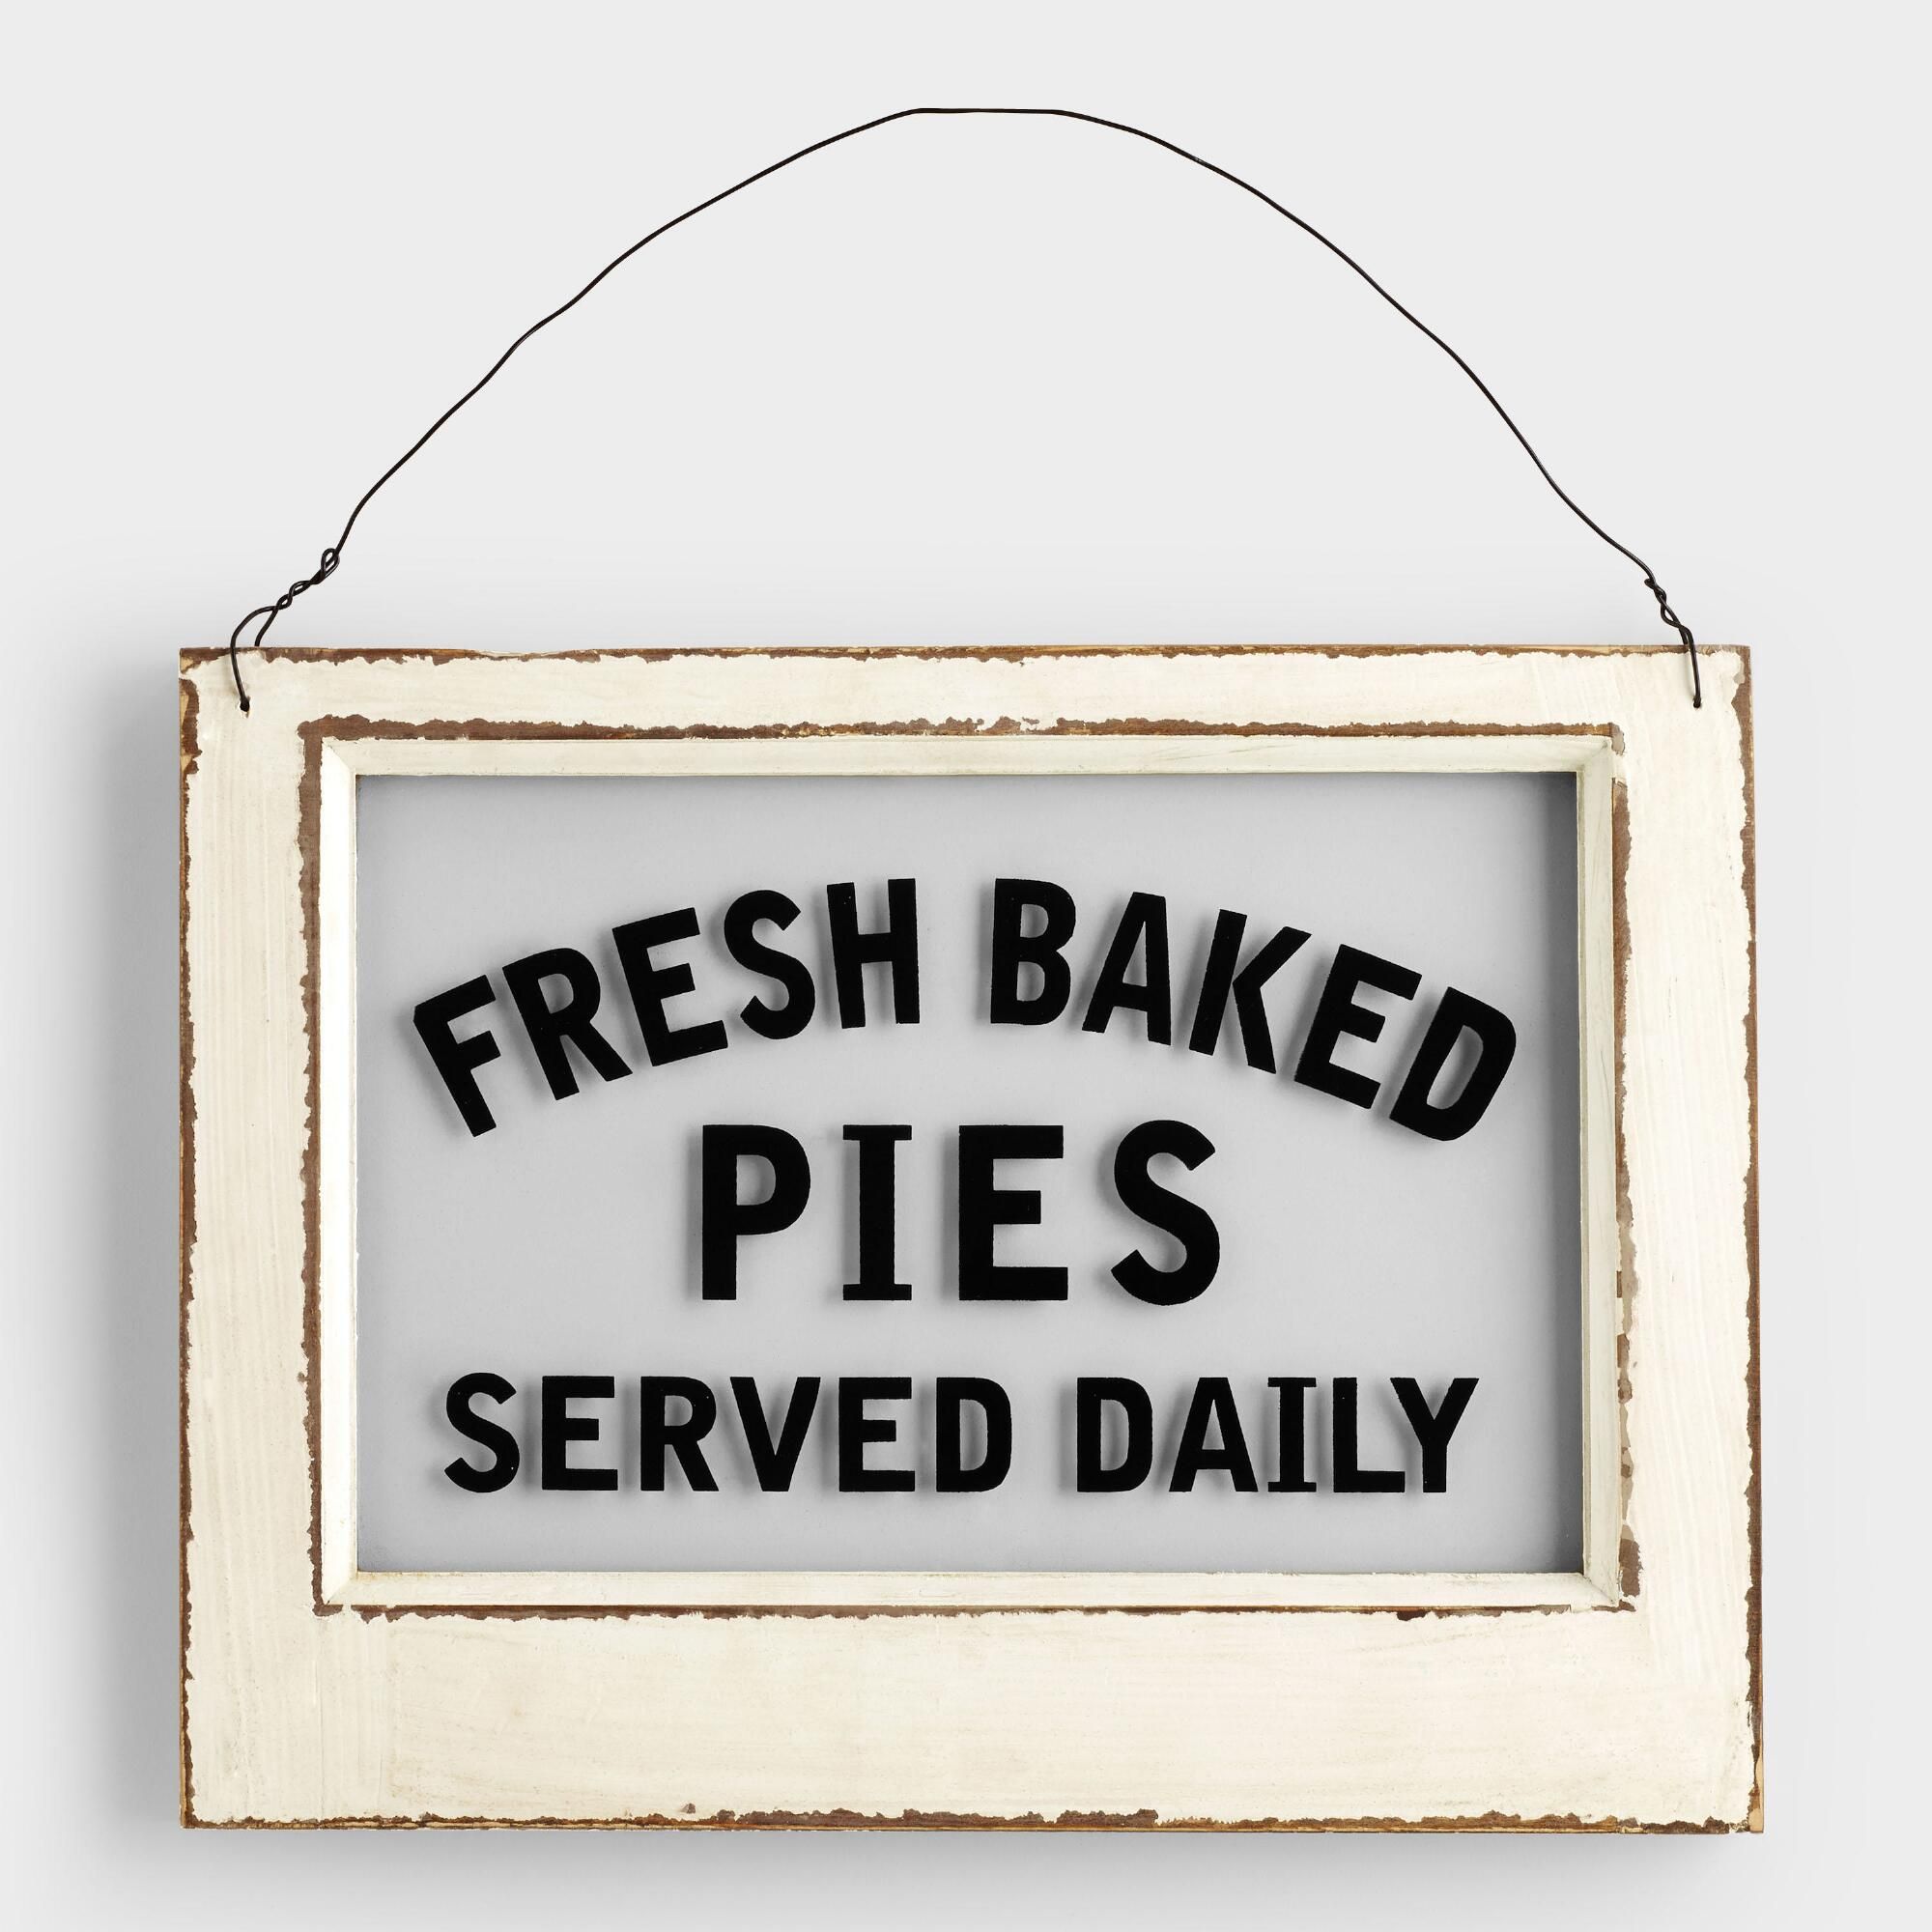 Wood and Glass Pie Sign - Small by World Market | World Market